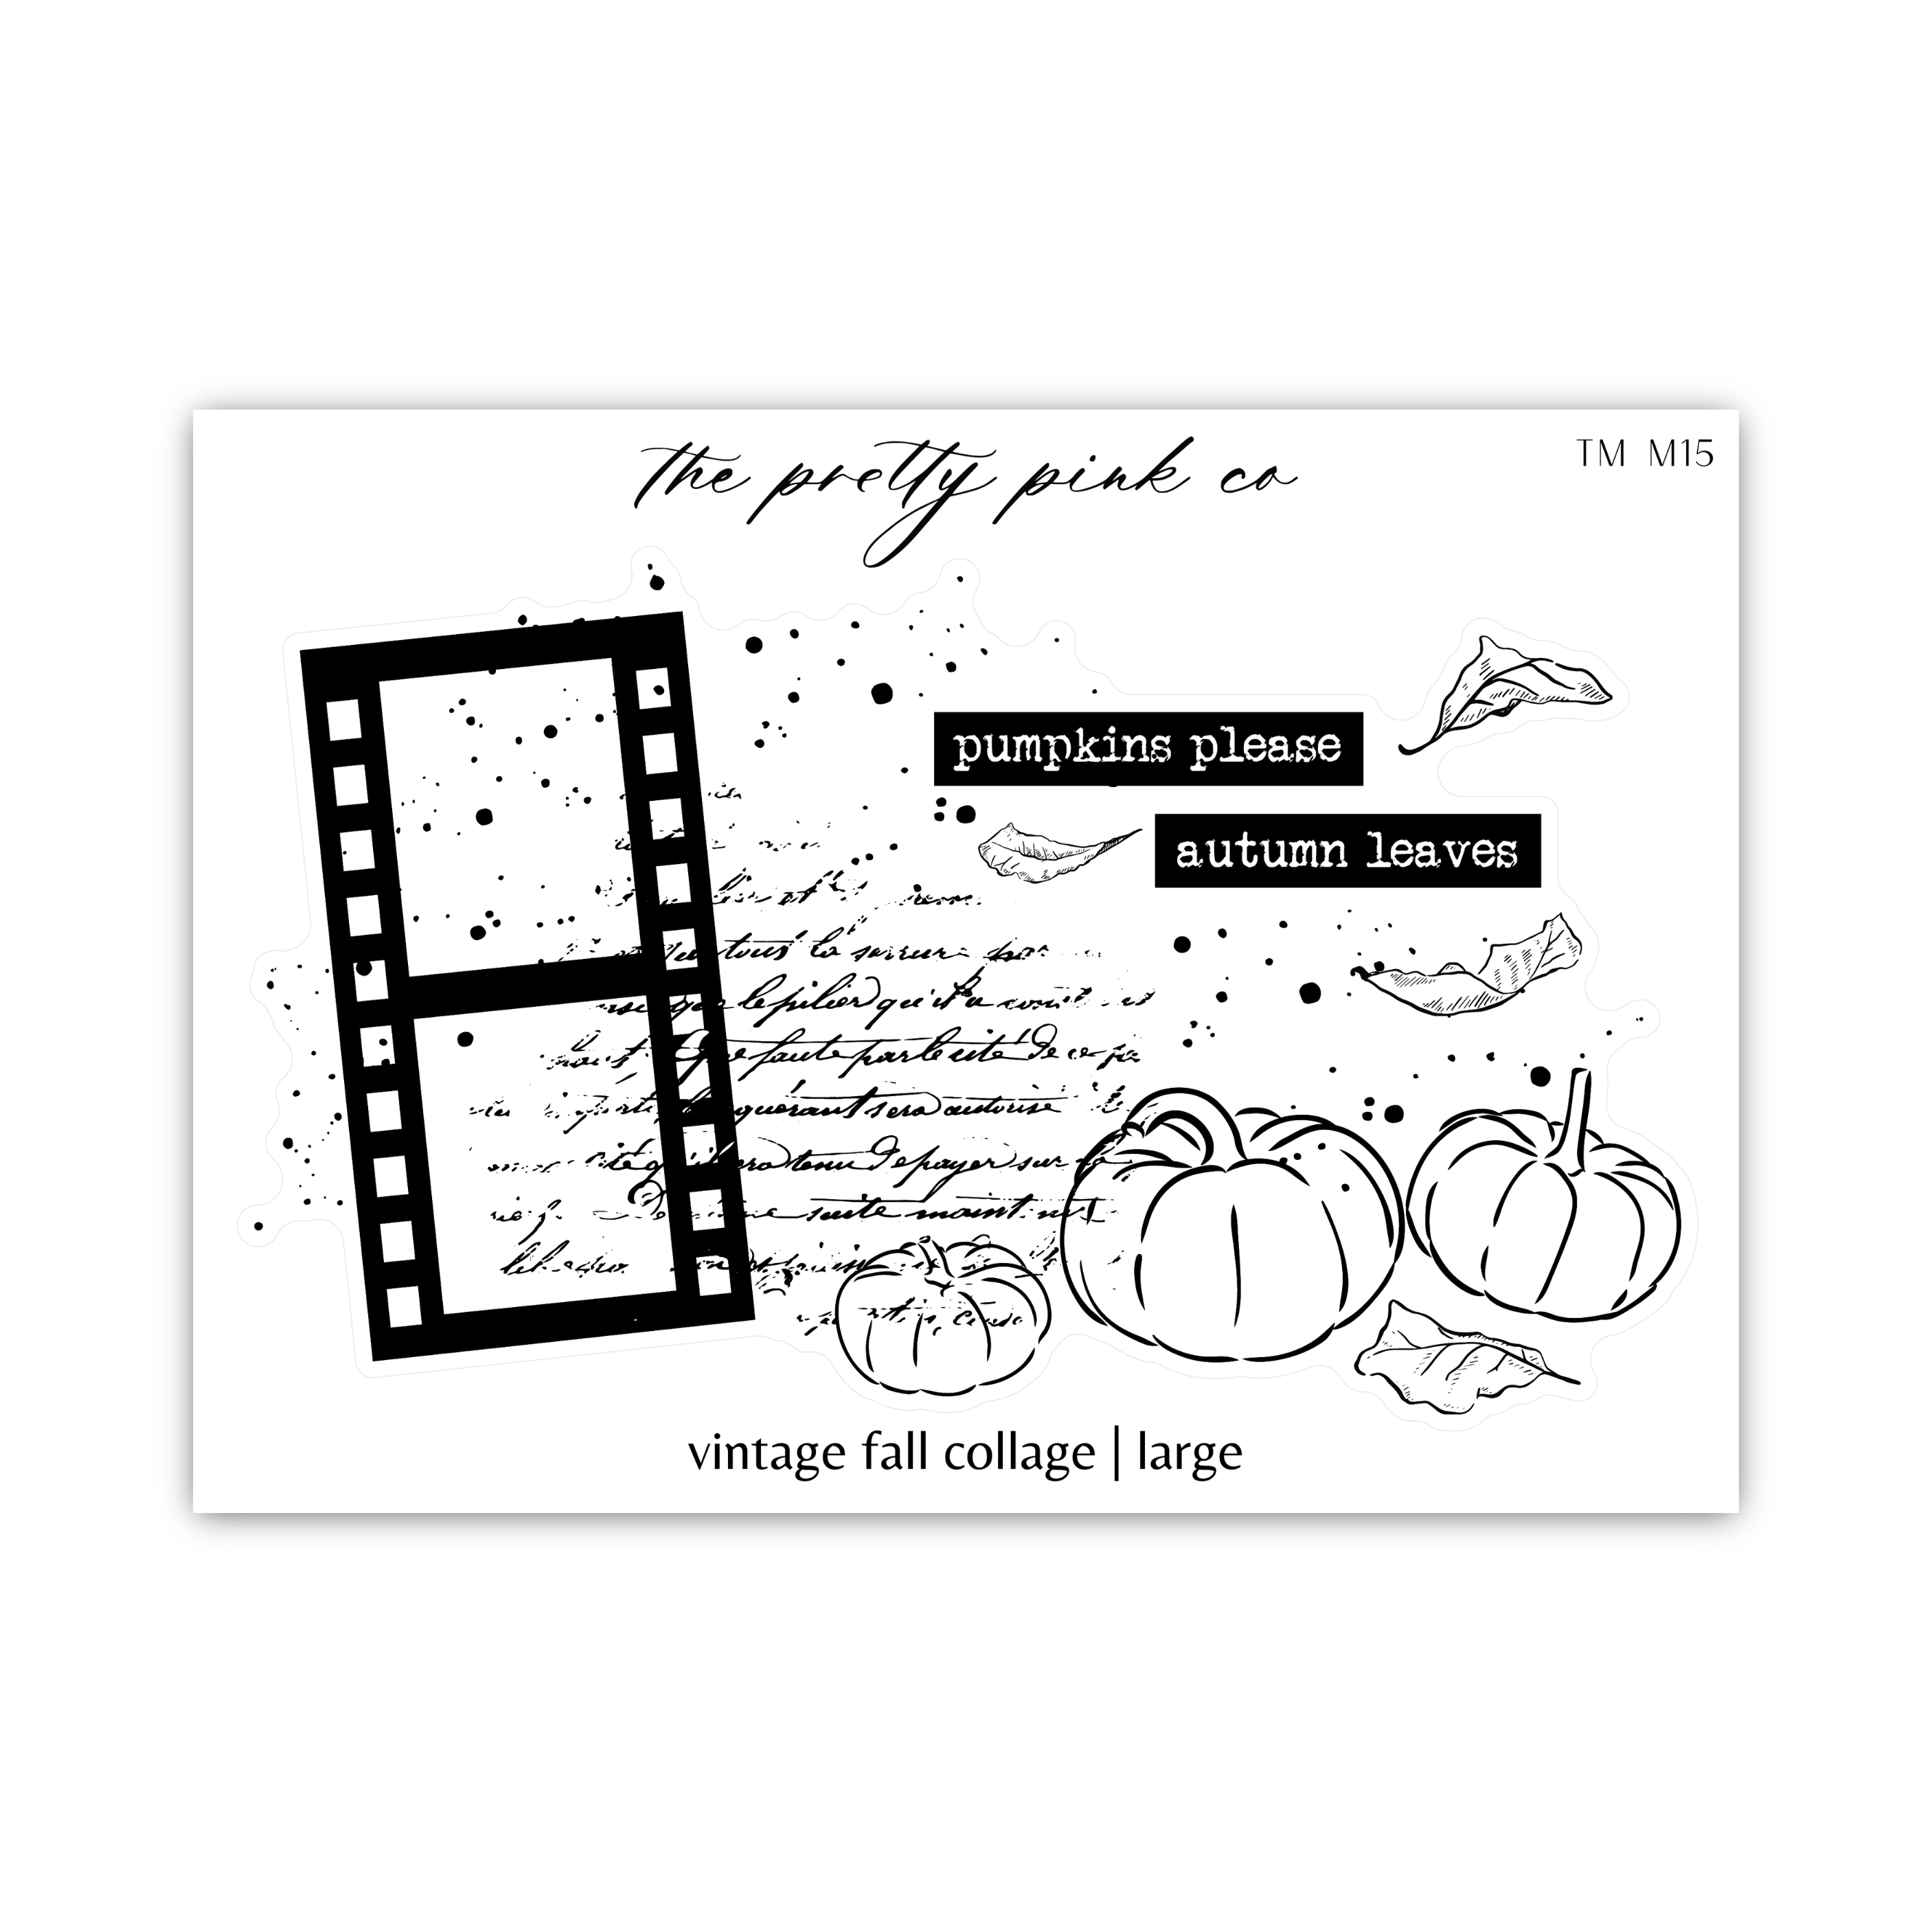 Vintage Fall Collage | Large